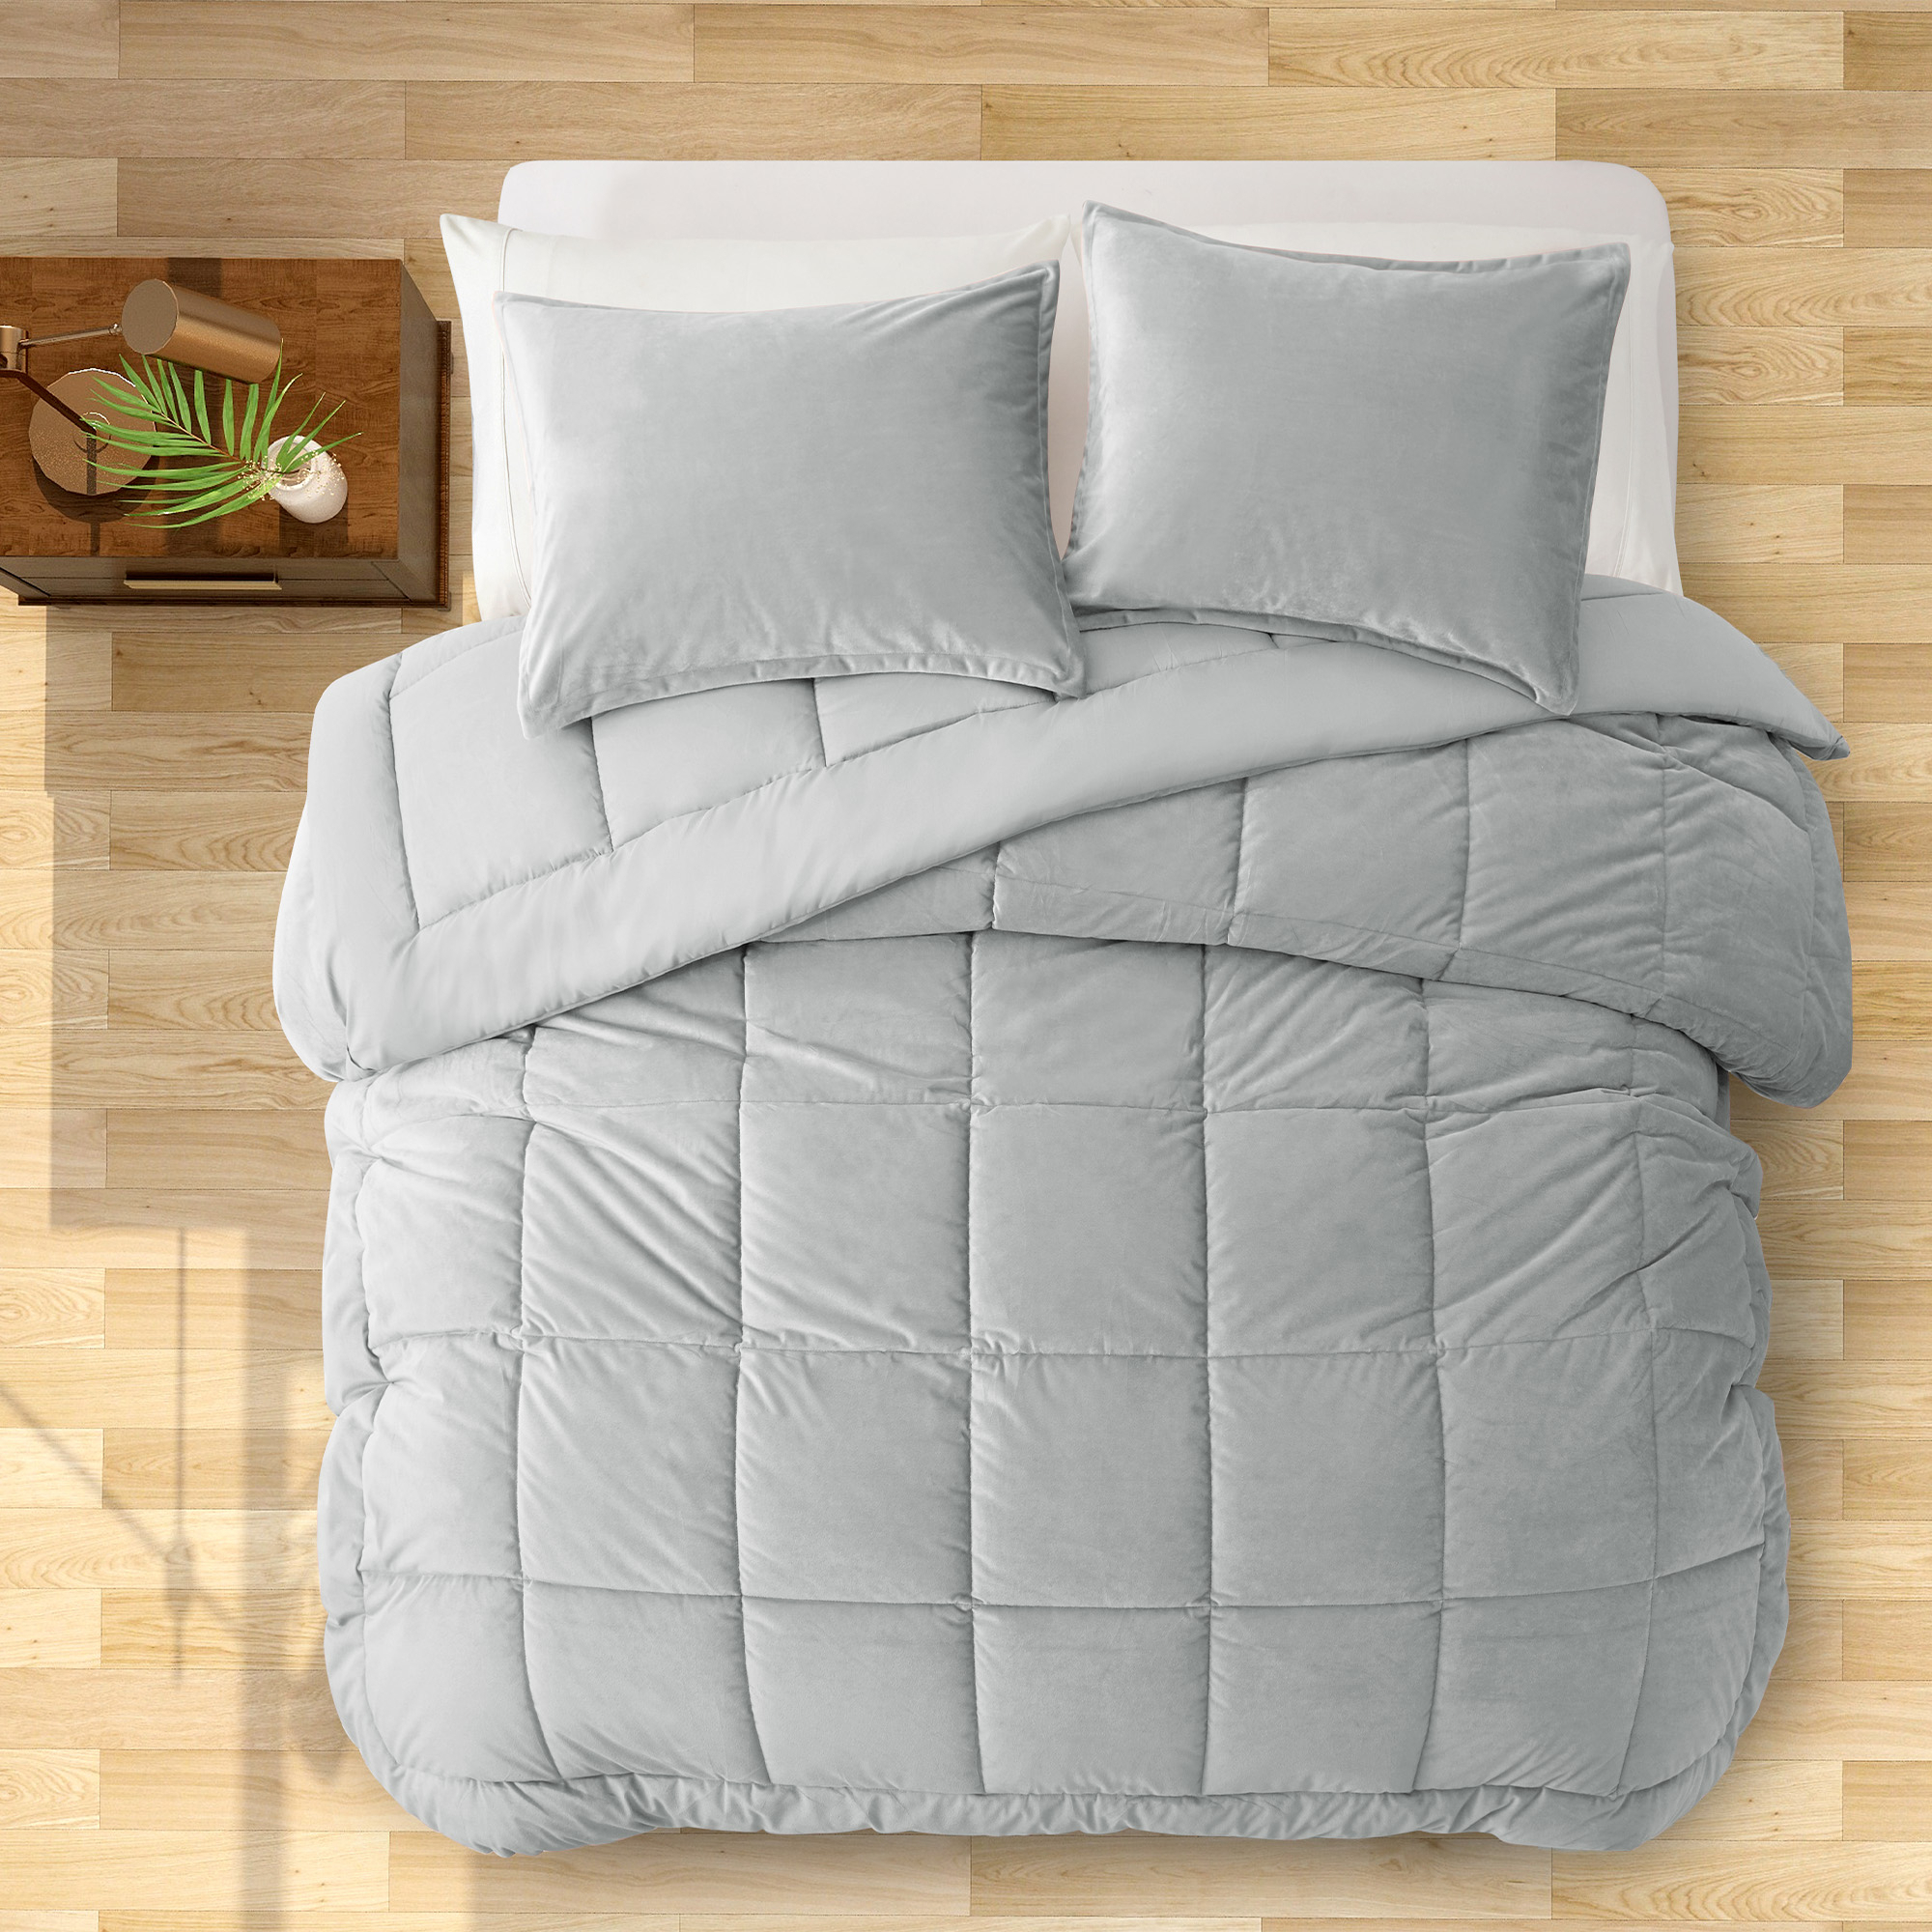 2 Or 3 Pieces Quilted Comforter All Season Down Alternative Reversible Ultra Soft Velet Duvet Insert - Twin Size